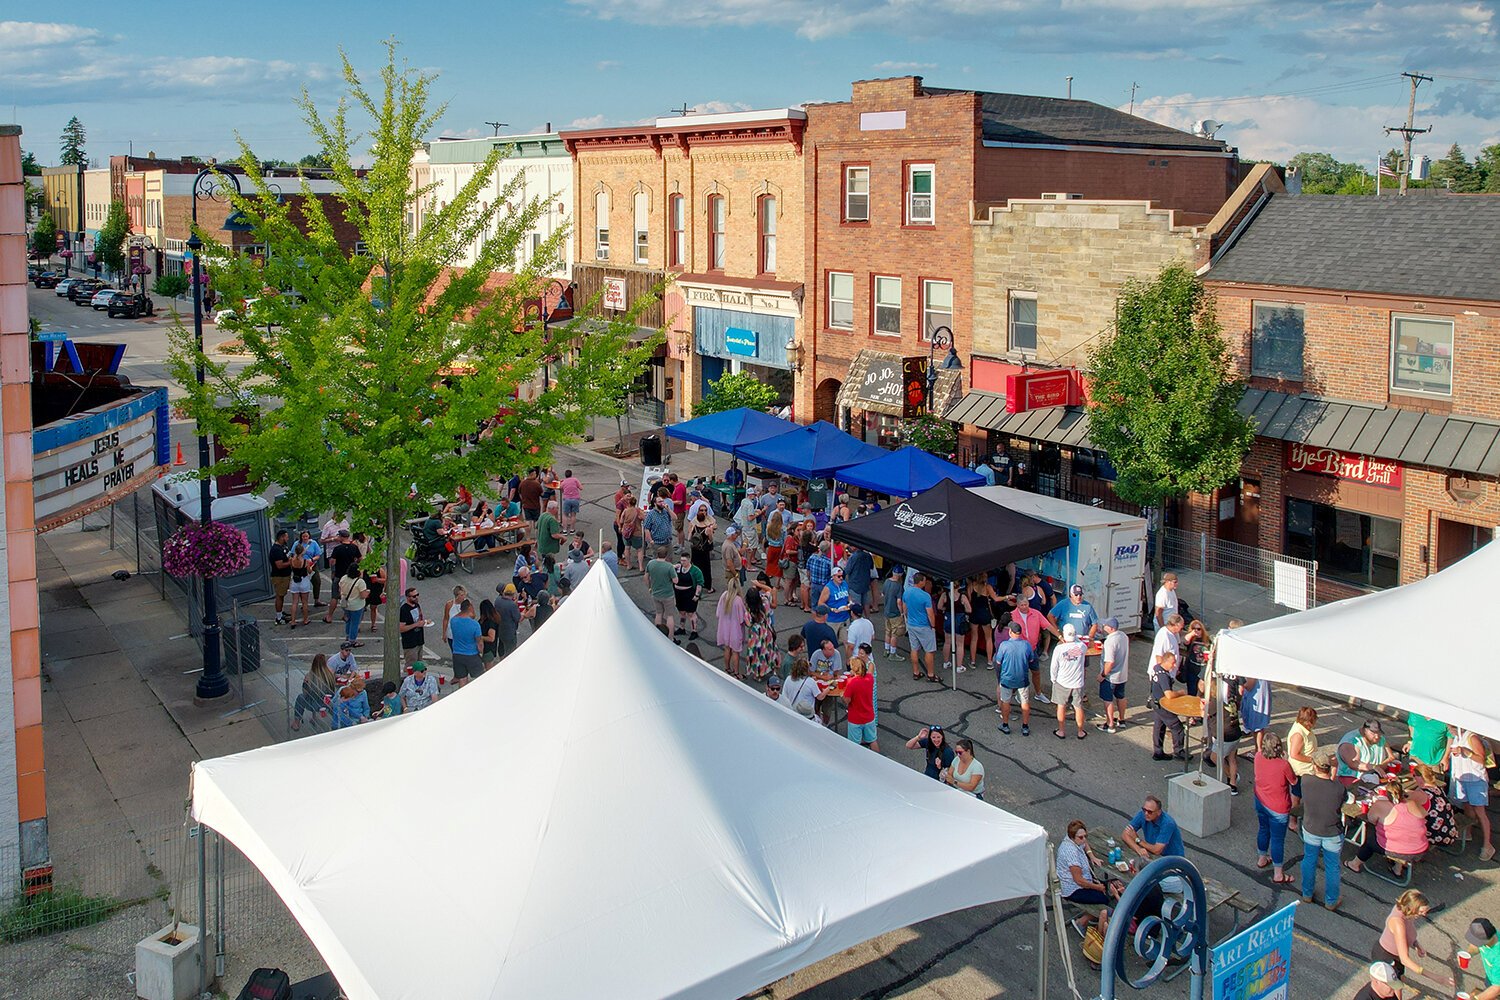 Revelers fill Main Street to celebrate the 90th anniversary of The Bird Bar and Grill in Mt. Pleasant, MI on Saturday, July 29, 2023.